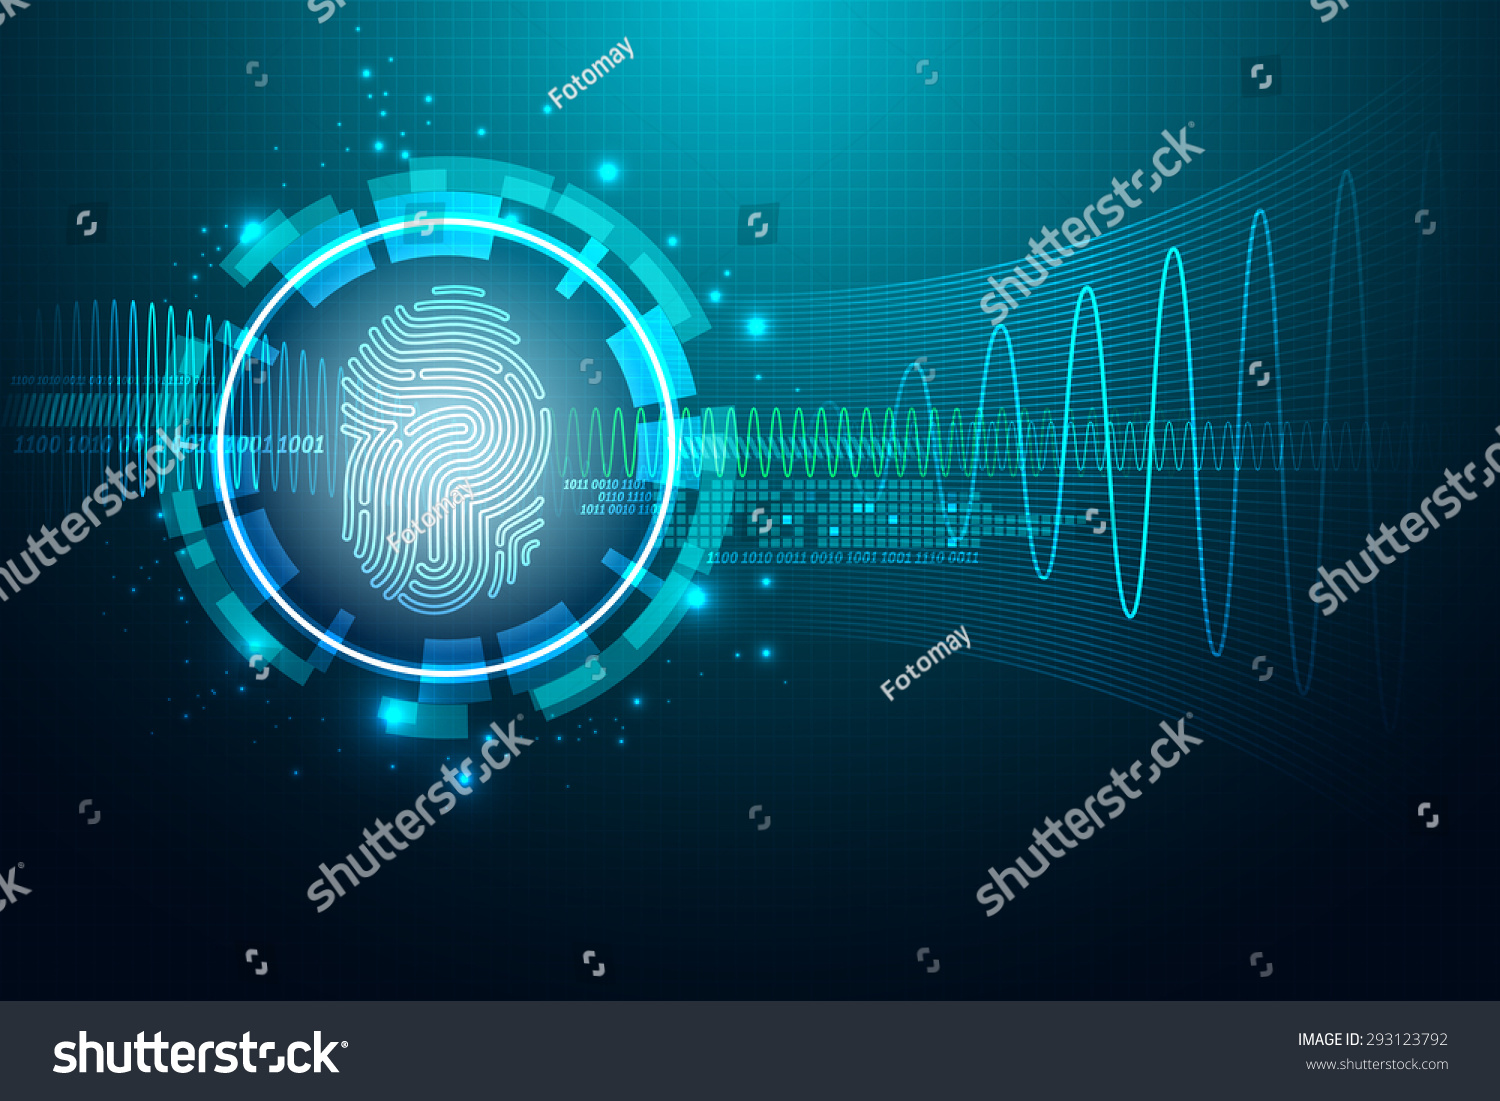 stock vector abstract technology background security system concept with fingerprint letter p sign vector 293123792